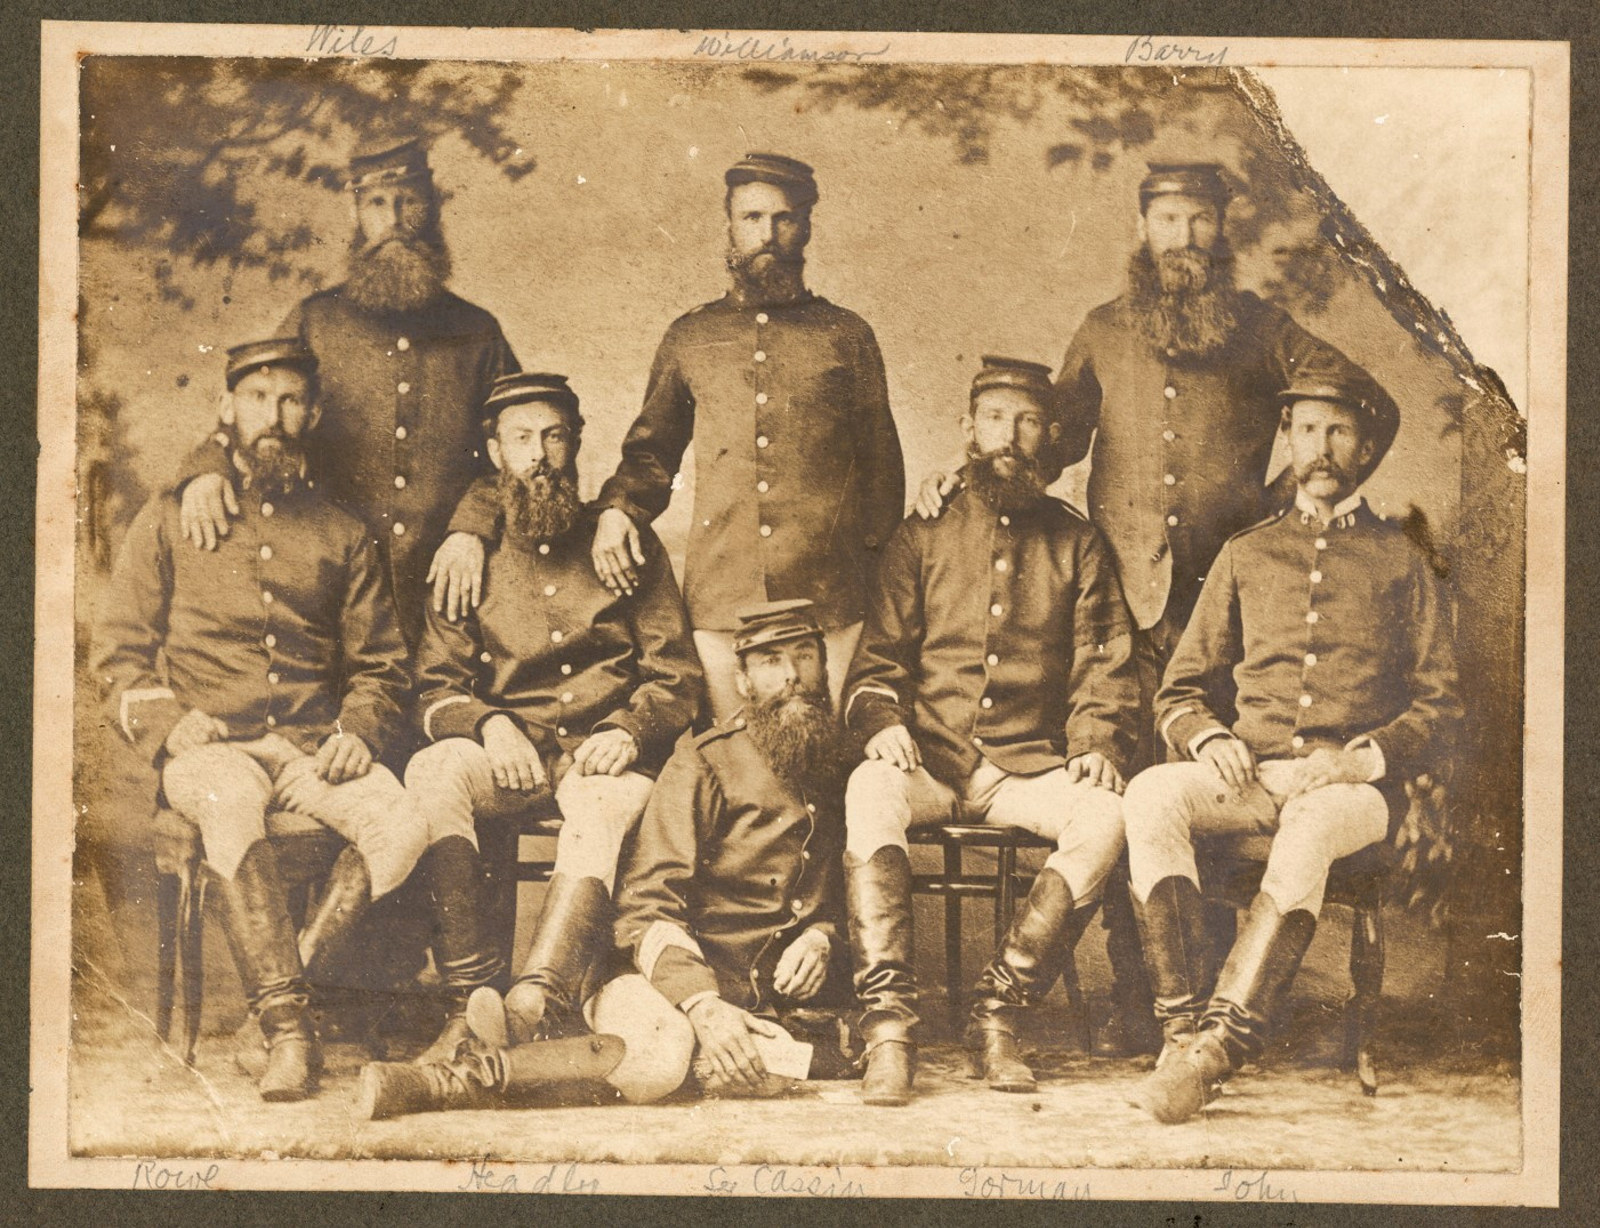 Group of troopers who captured Captain Moonlite in 1879